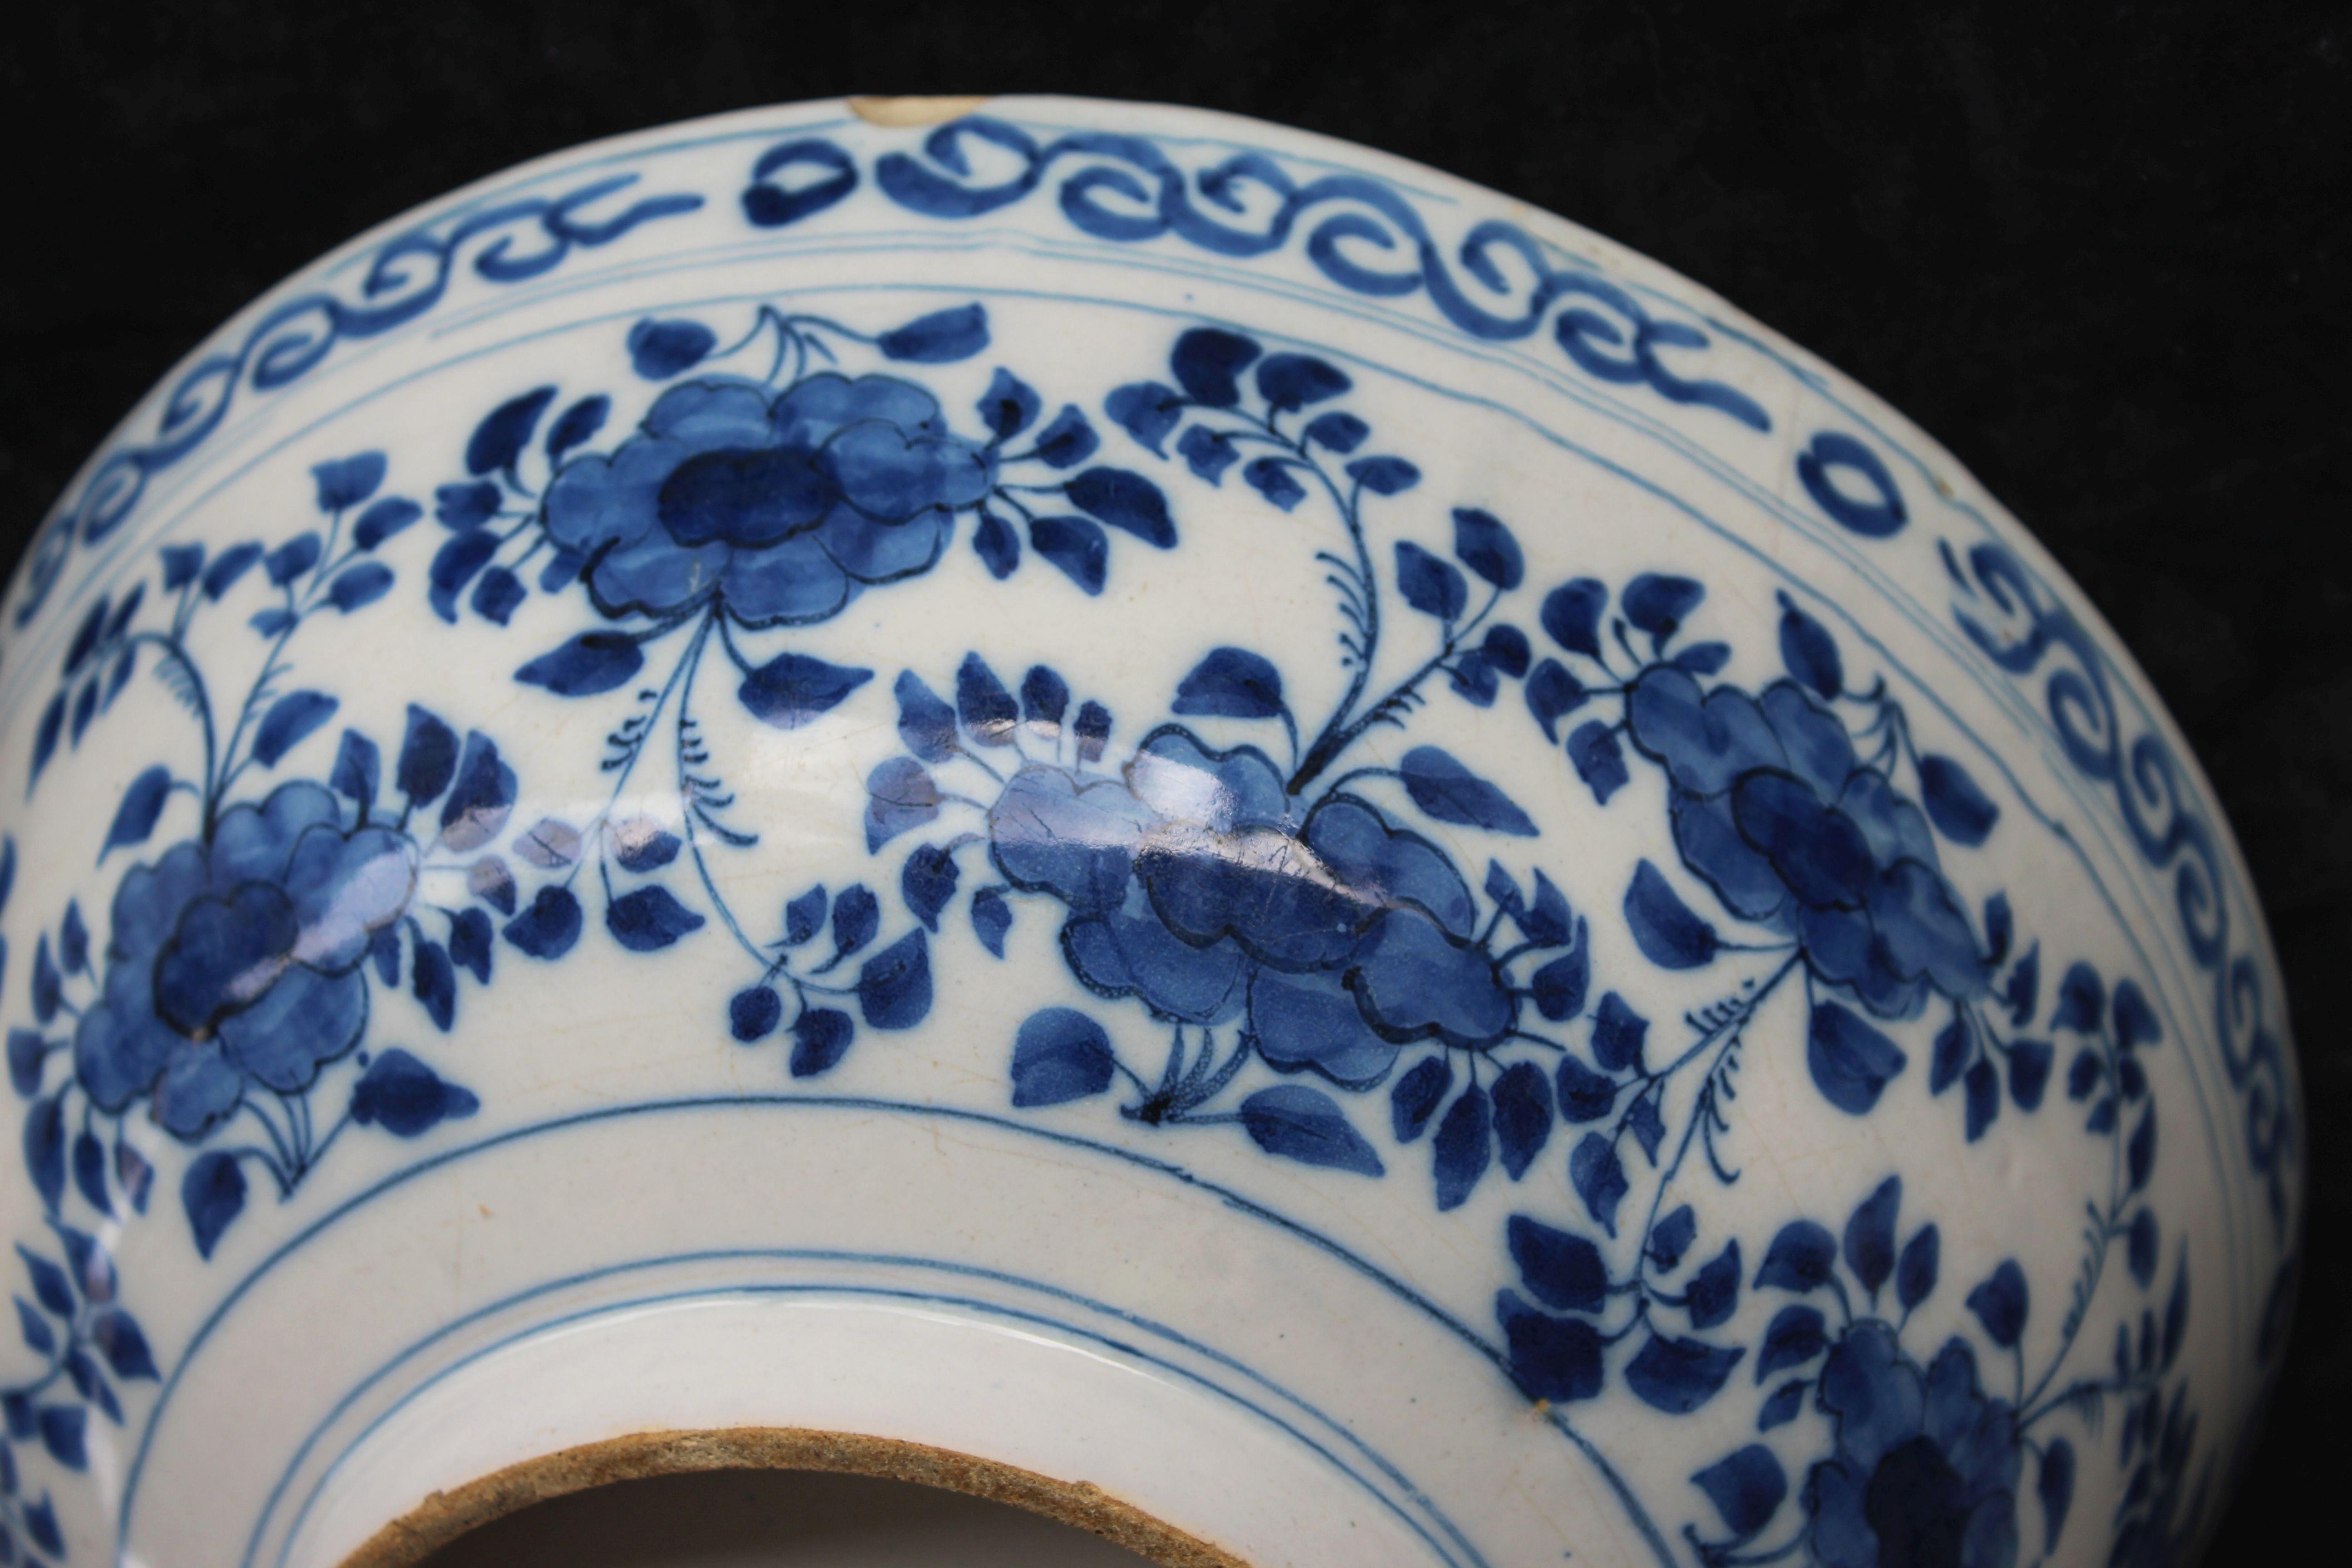 Blue and white bowl Delft, 1690-1710

The bowl is painted on the outside with a continuous garland of flowers under a scroll border. The inside is boldly painted with a flying bird under clouds, above a simplified ground. This schematic decoration